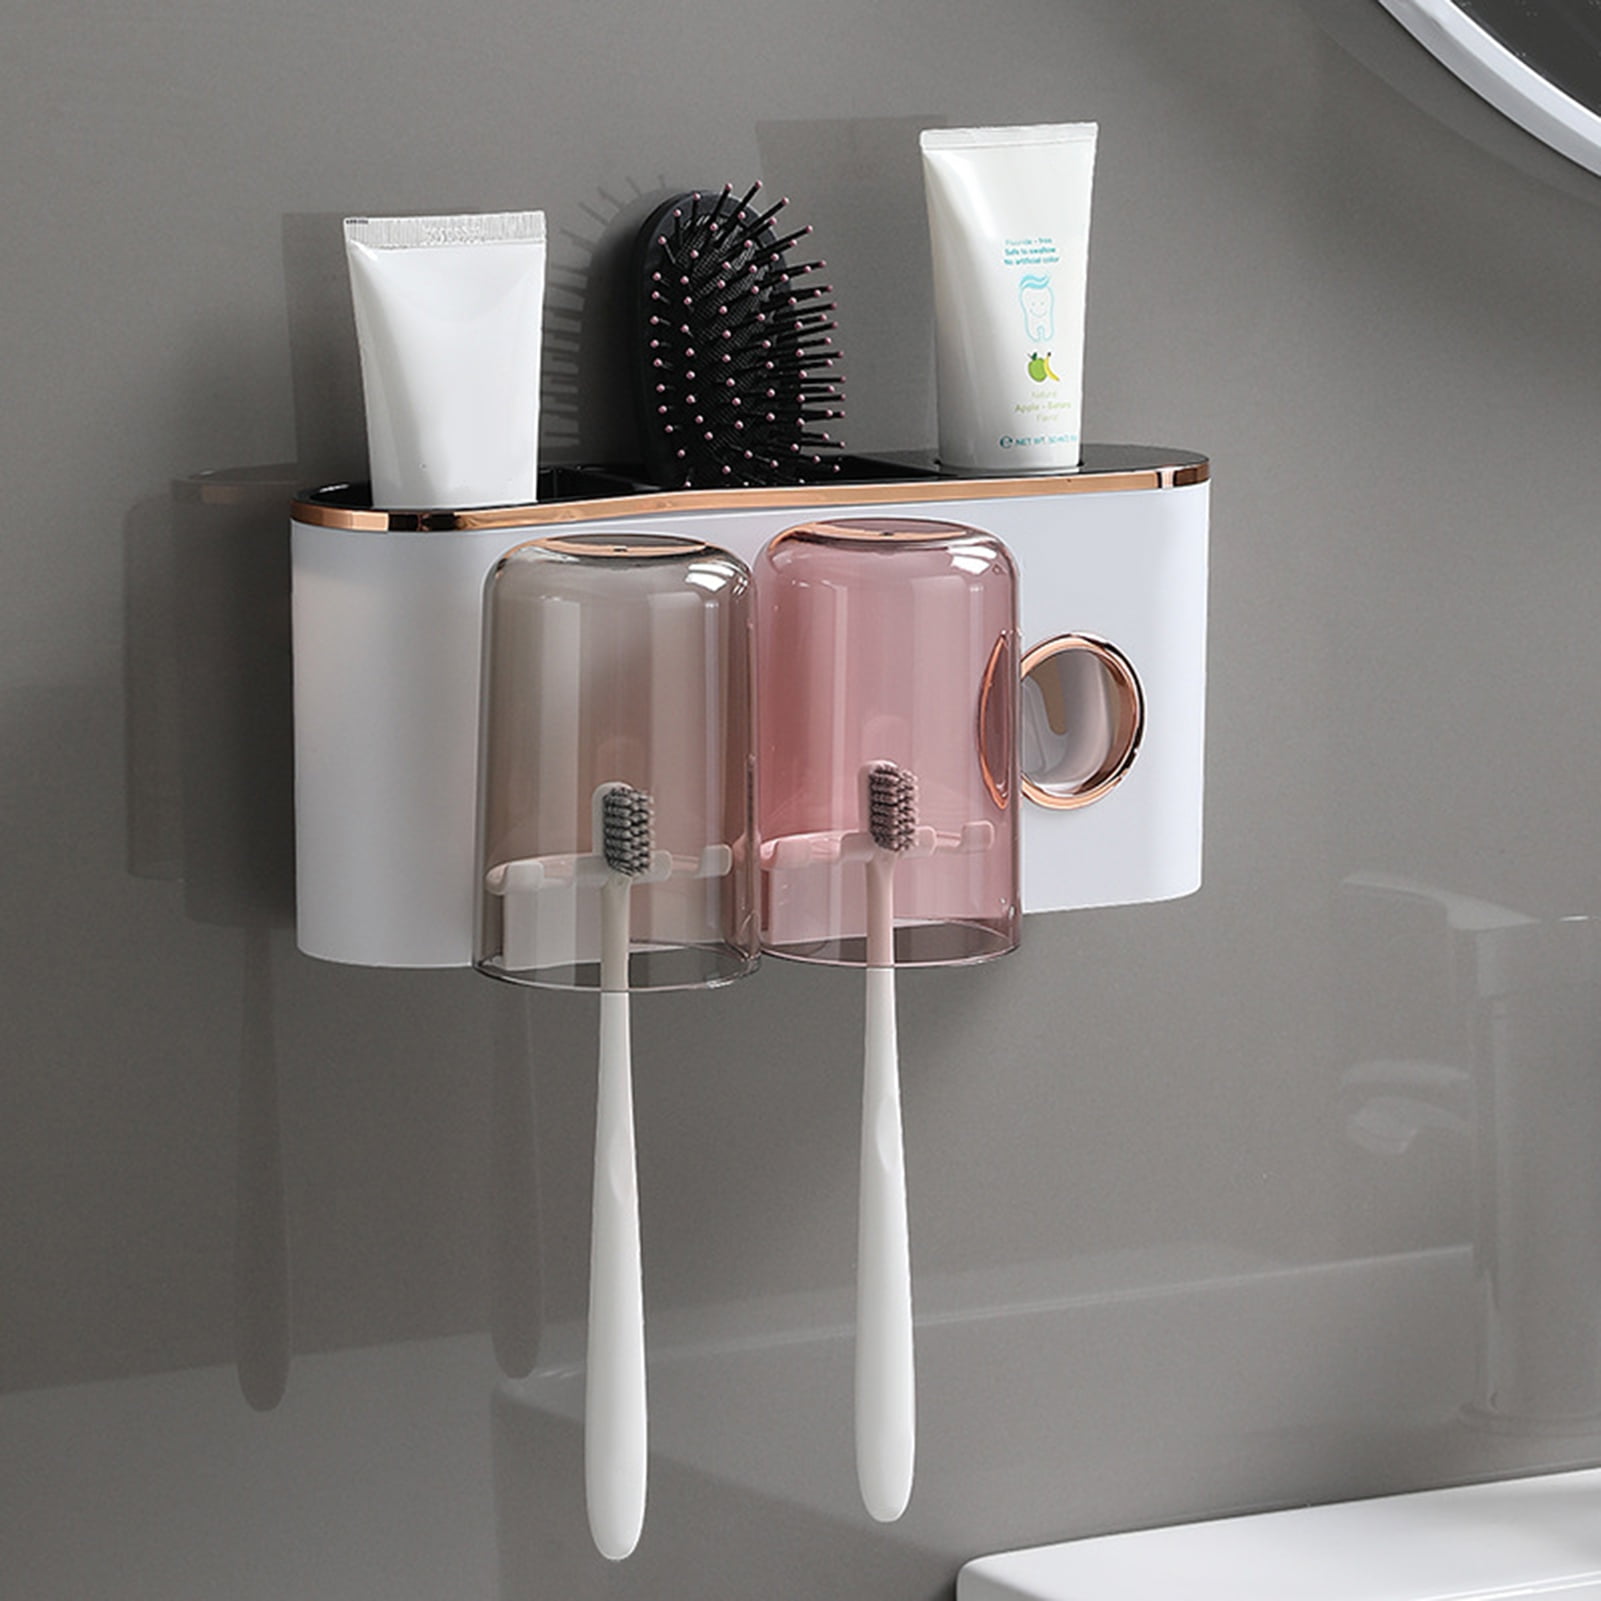 Mspan Toothbrush Razor Holder for Shower: Wall Mounted Tooth Brush Organizer - Self Adhesive Hanging Mount for Bathroom Toothpaste Shaver Loofah 